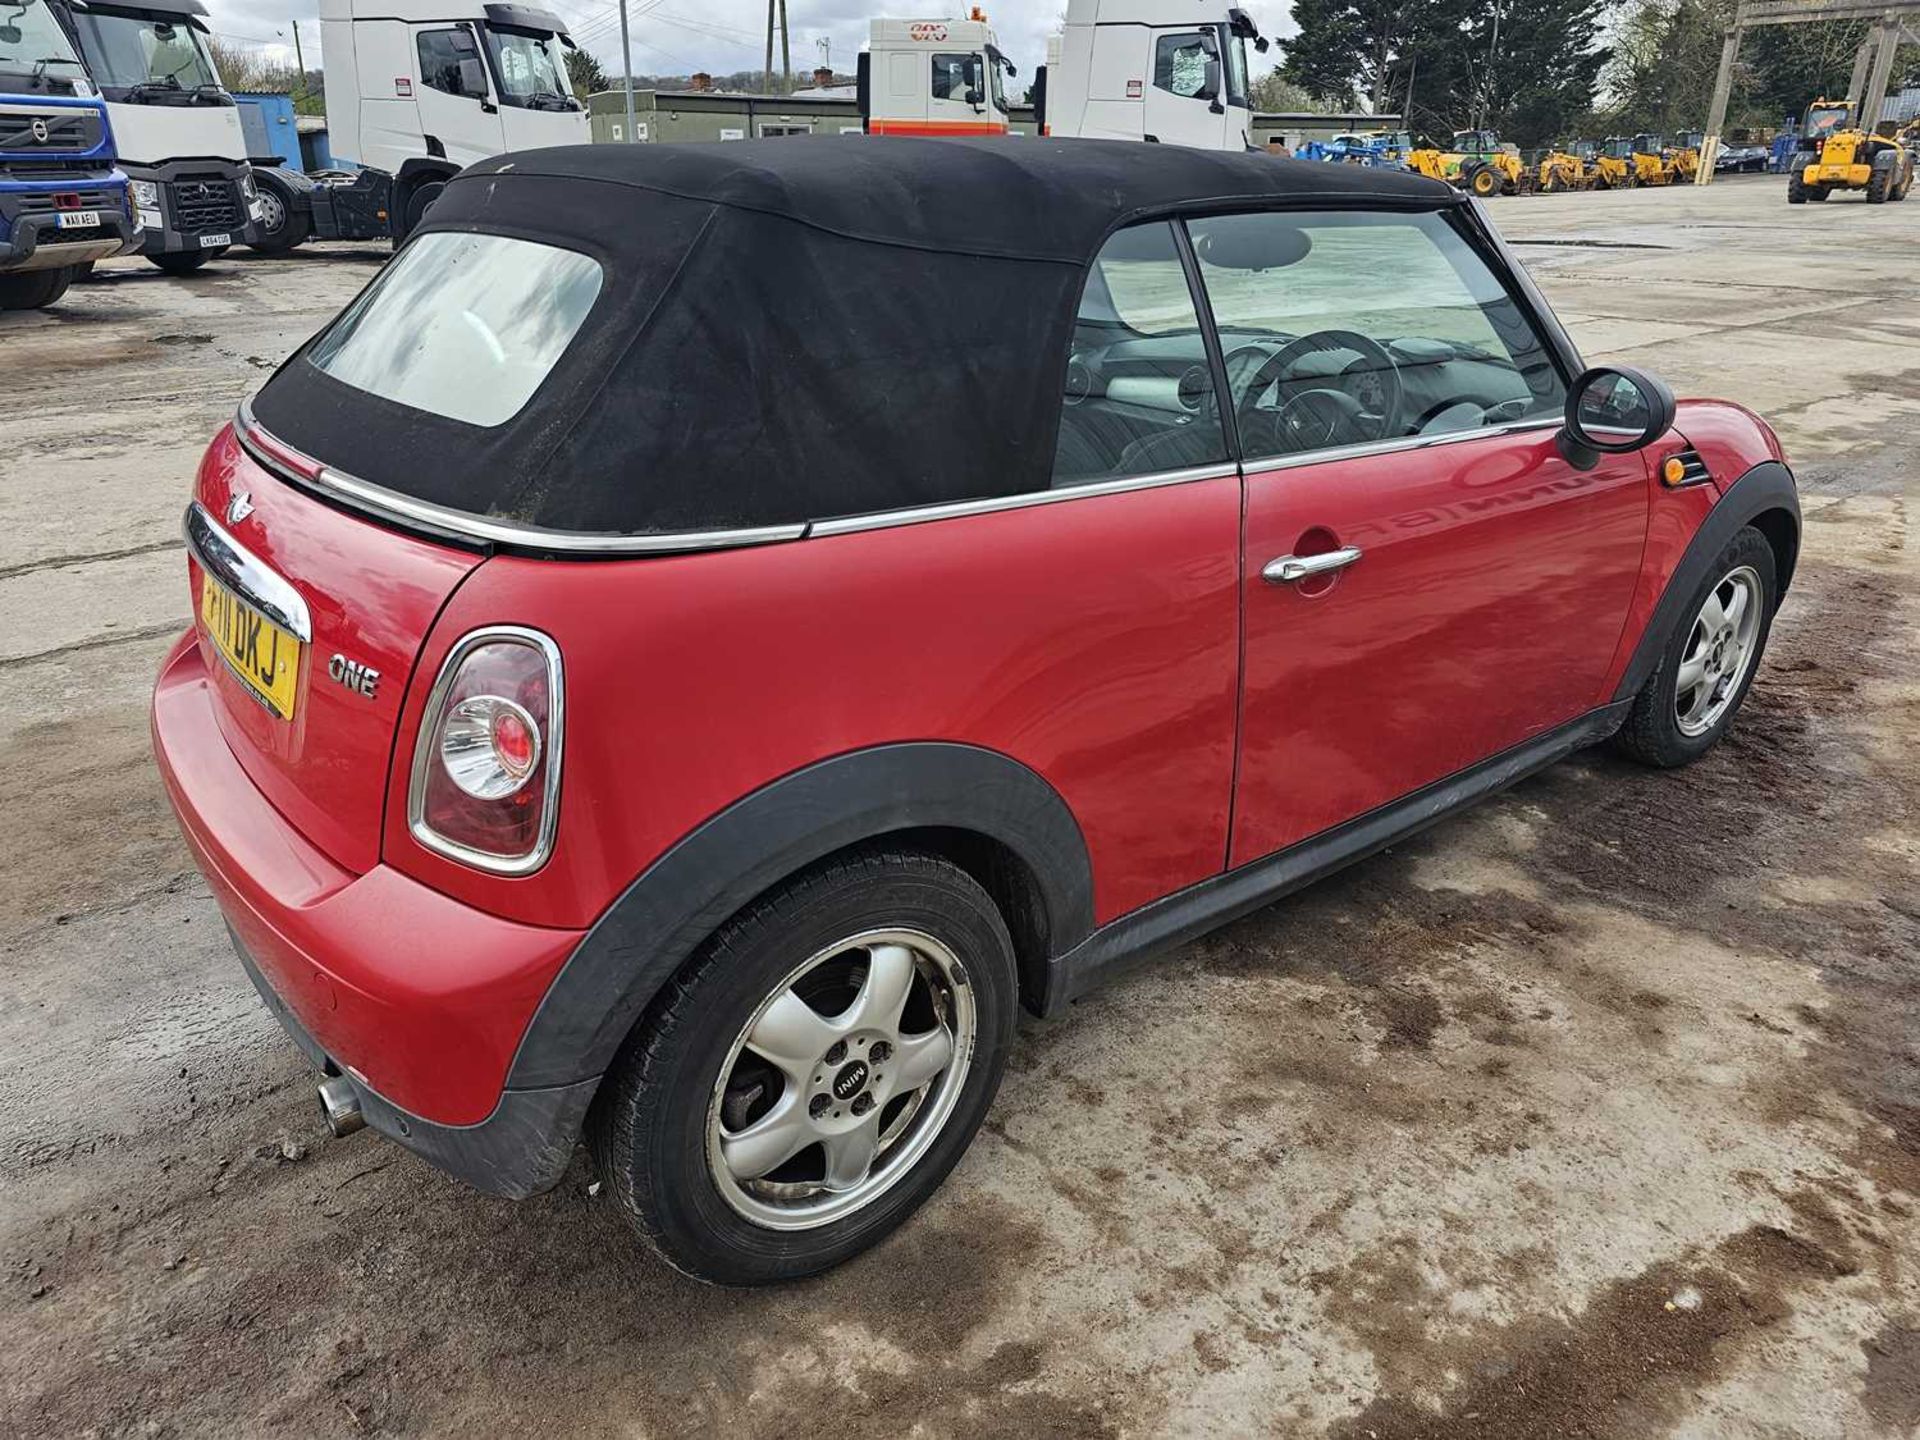 2011 Mini One Convertible, 6 Speed, Bluetooth, Cruise Control, A/C (Reg. Docs. Available) - Image 3 of 25